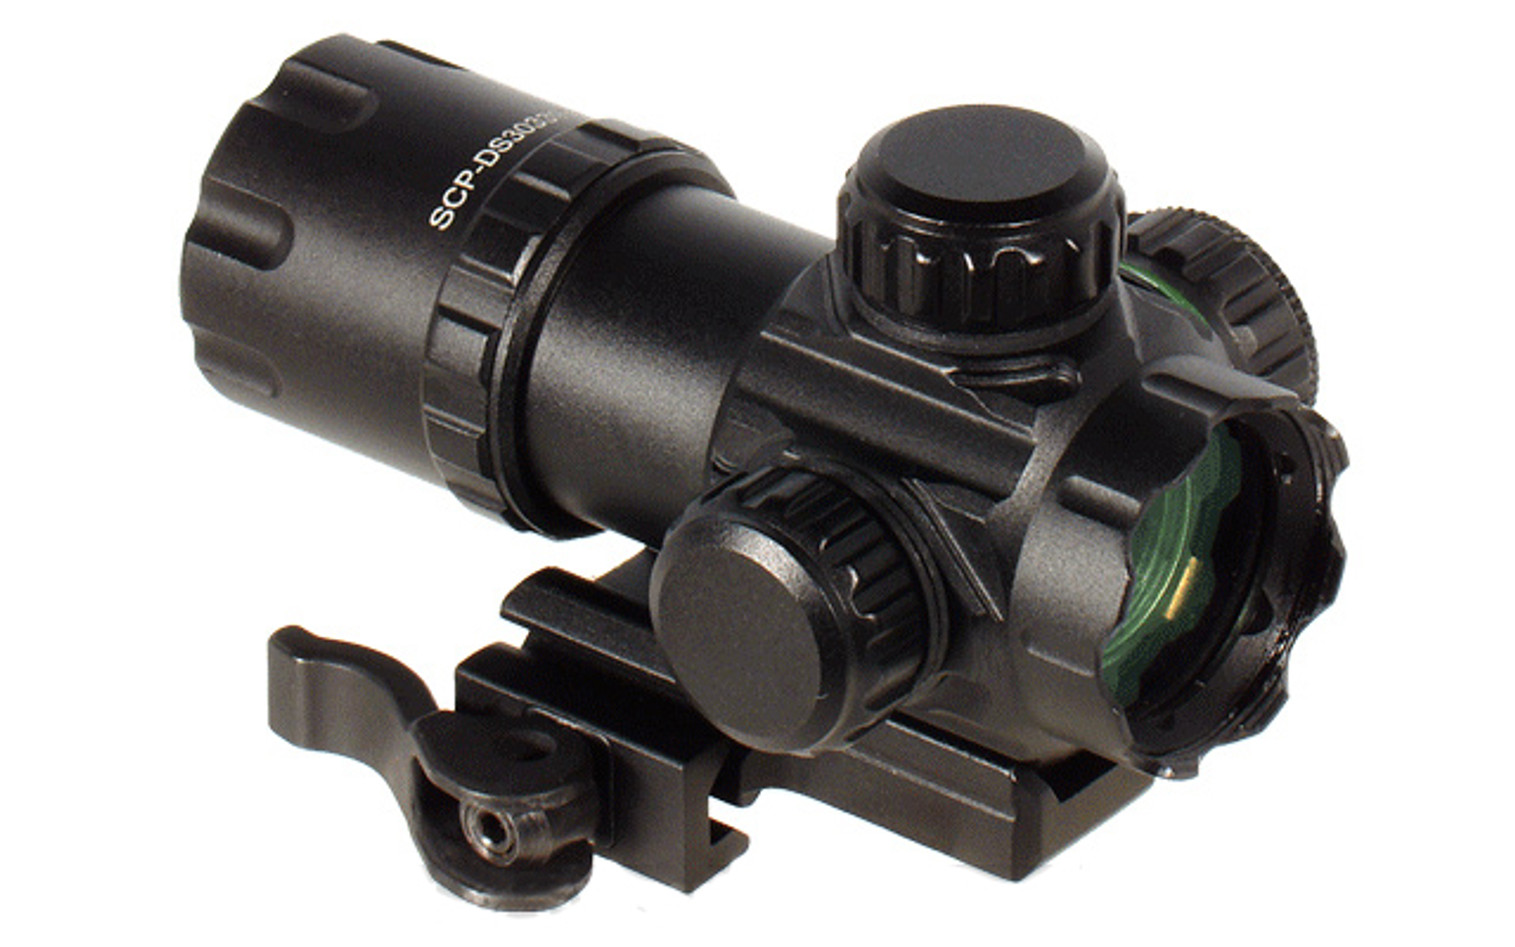 UTG 3.9" ITA Red/Green Dot Sight with 2 QD Mounts and Flip-open Lens Caps